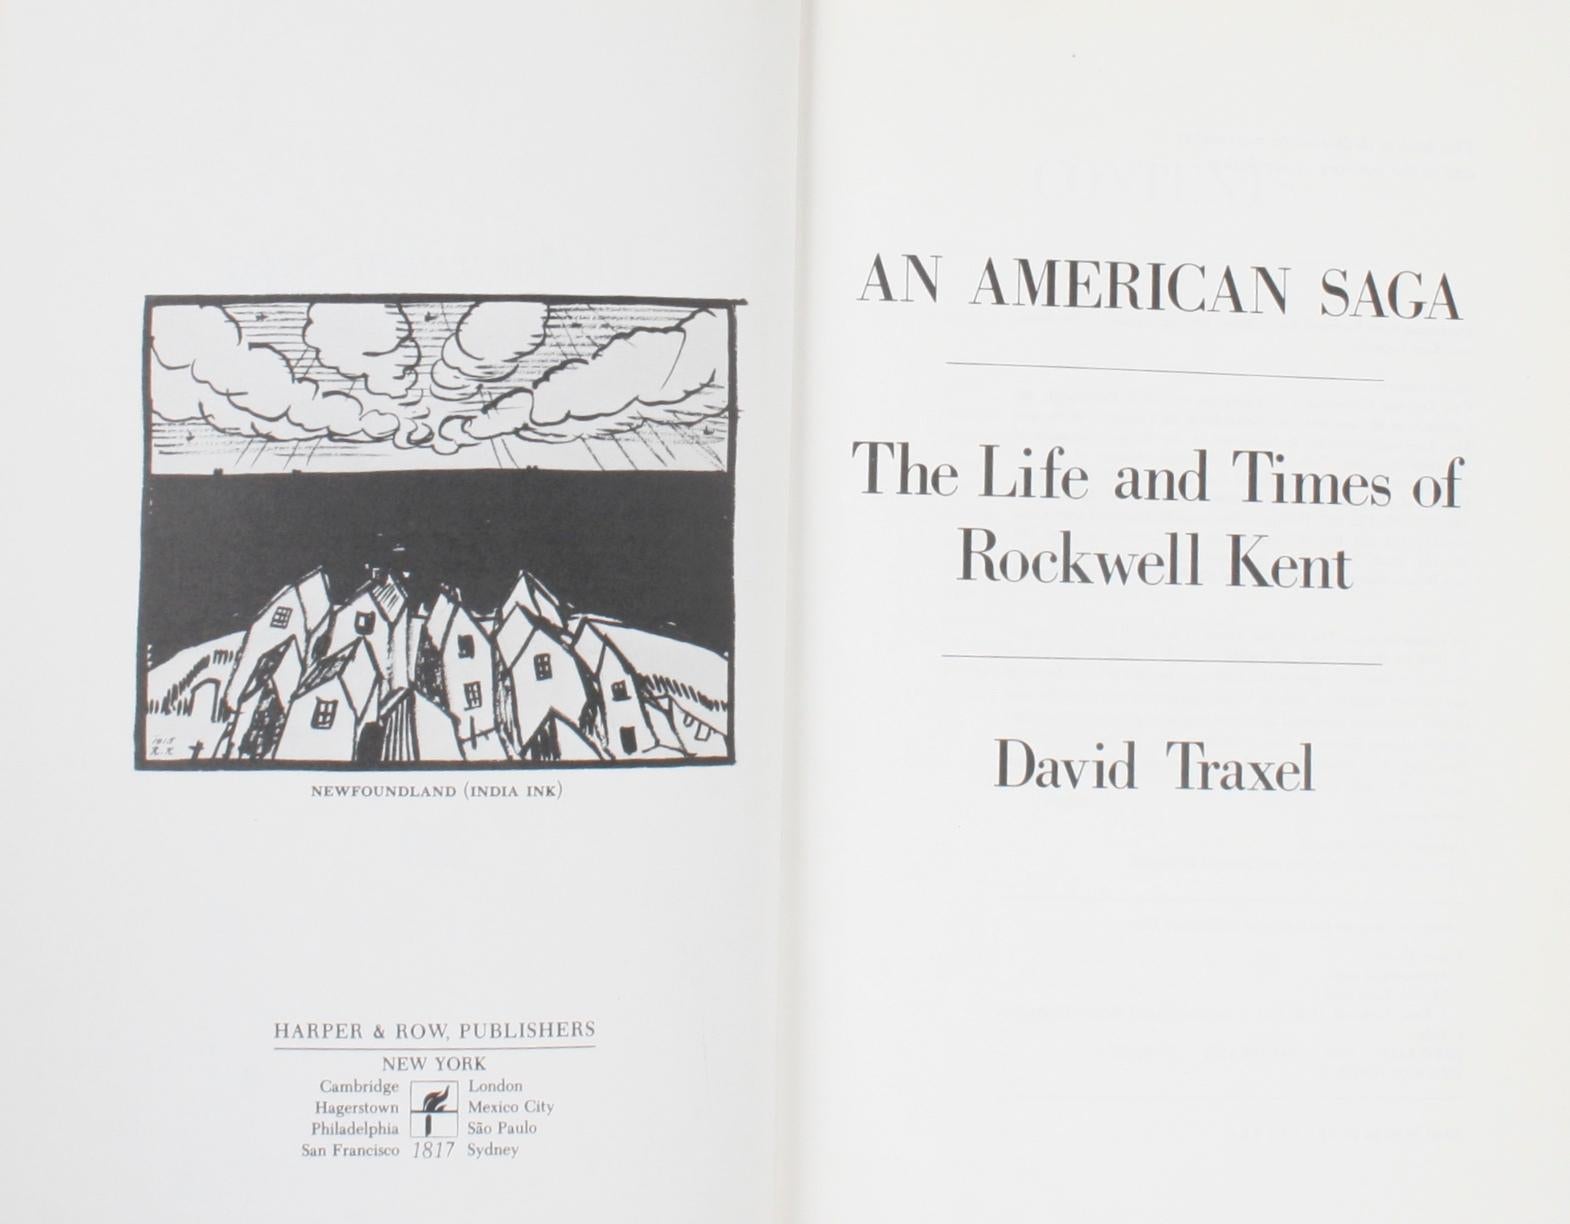 An American Saga: The Life and Times of Rockwell Kent by David Traxel. New York: Harper & Row, Publishers, 1980. Pre-Publication stated first edition hardcover with dust jacket and editors note. 248 pp. Biography of Rockwell Kent (1882-1971) an